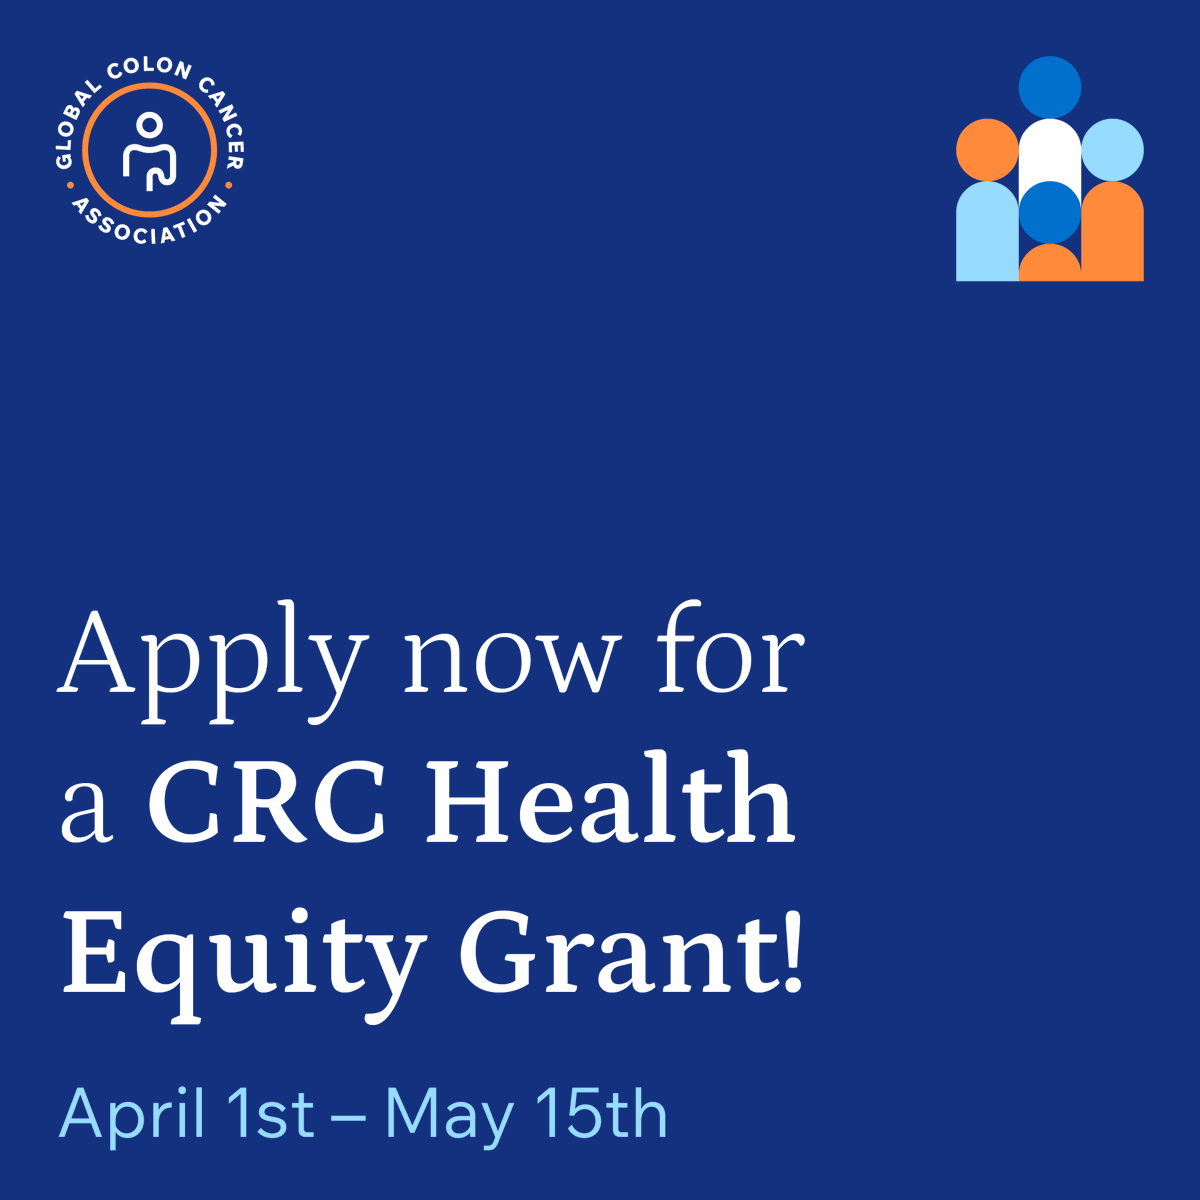 Don’t miss out! There’s 2 more weeks to apply for a CRC Health Equity Grant. Learn more: gcca.info/_HEG_24_Open_ #crchealthequitygrants #colorectalcancer #bowelcancer